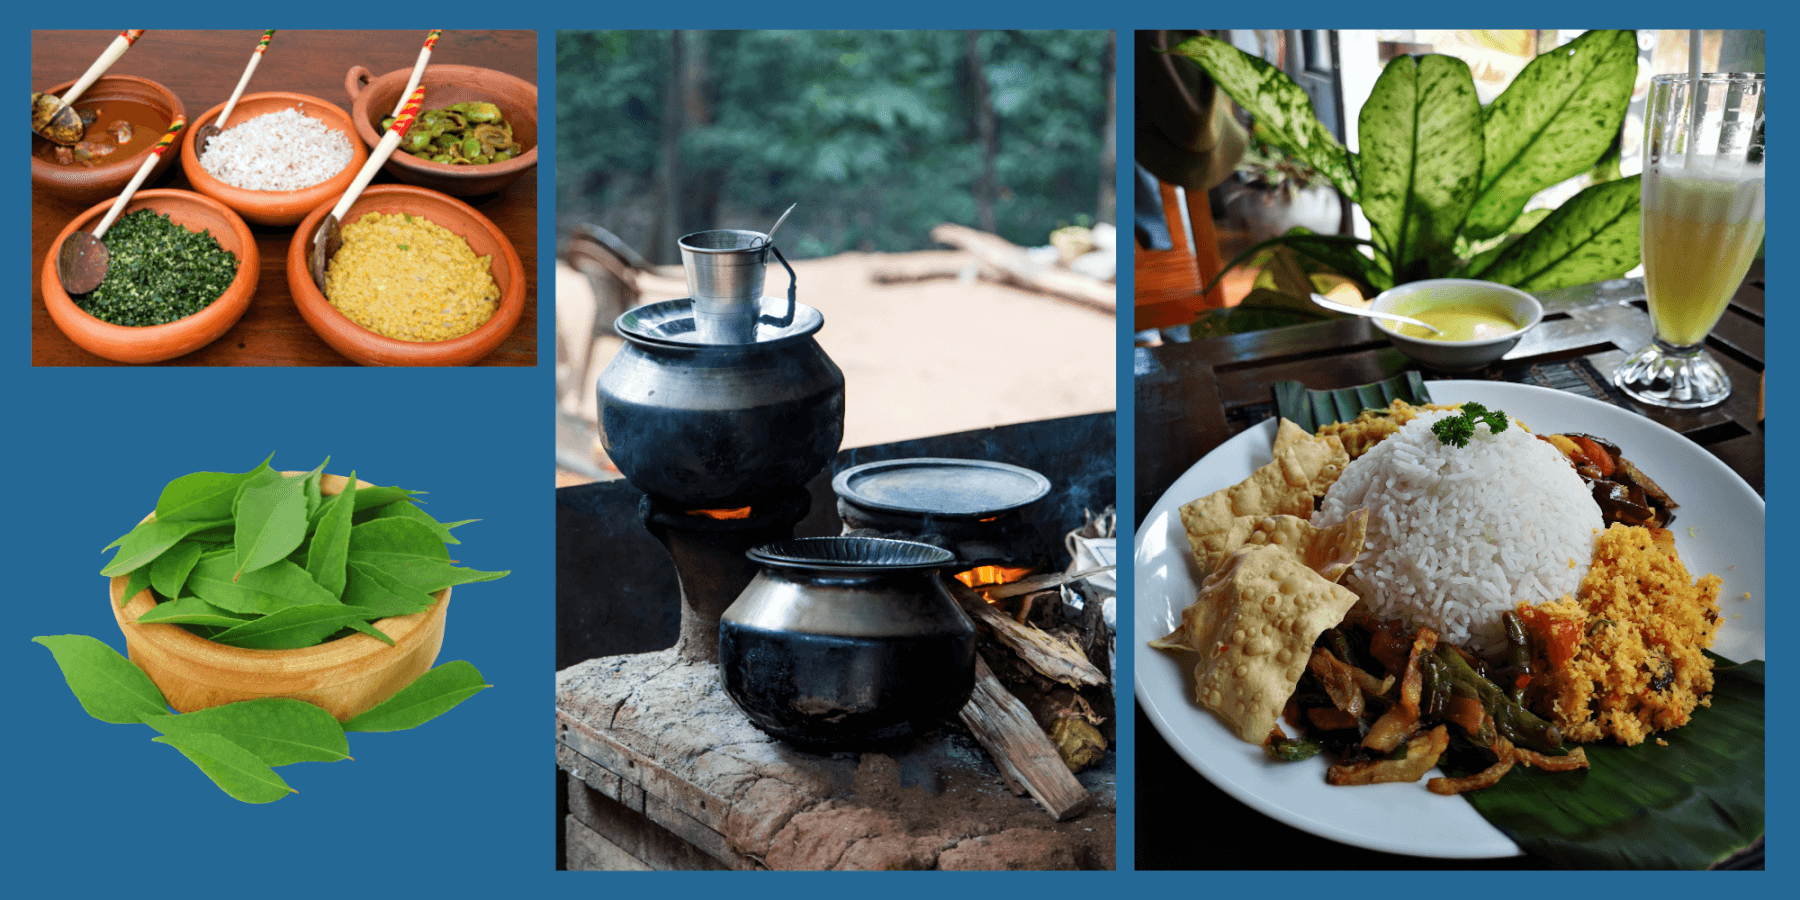 Freshly prepared traditional Sri Lankan food, which incorporates multiple spices and Ayurvedic guidance, is very beneficial to people's health. Improving the abundance of healthy and balanced food that generates good income is what we strive to do. © Renaissance Sri Lanka